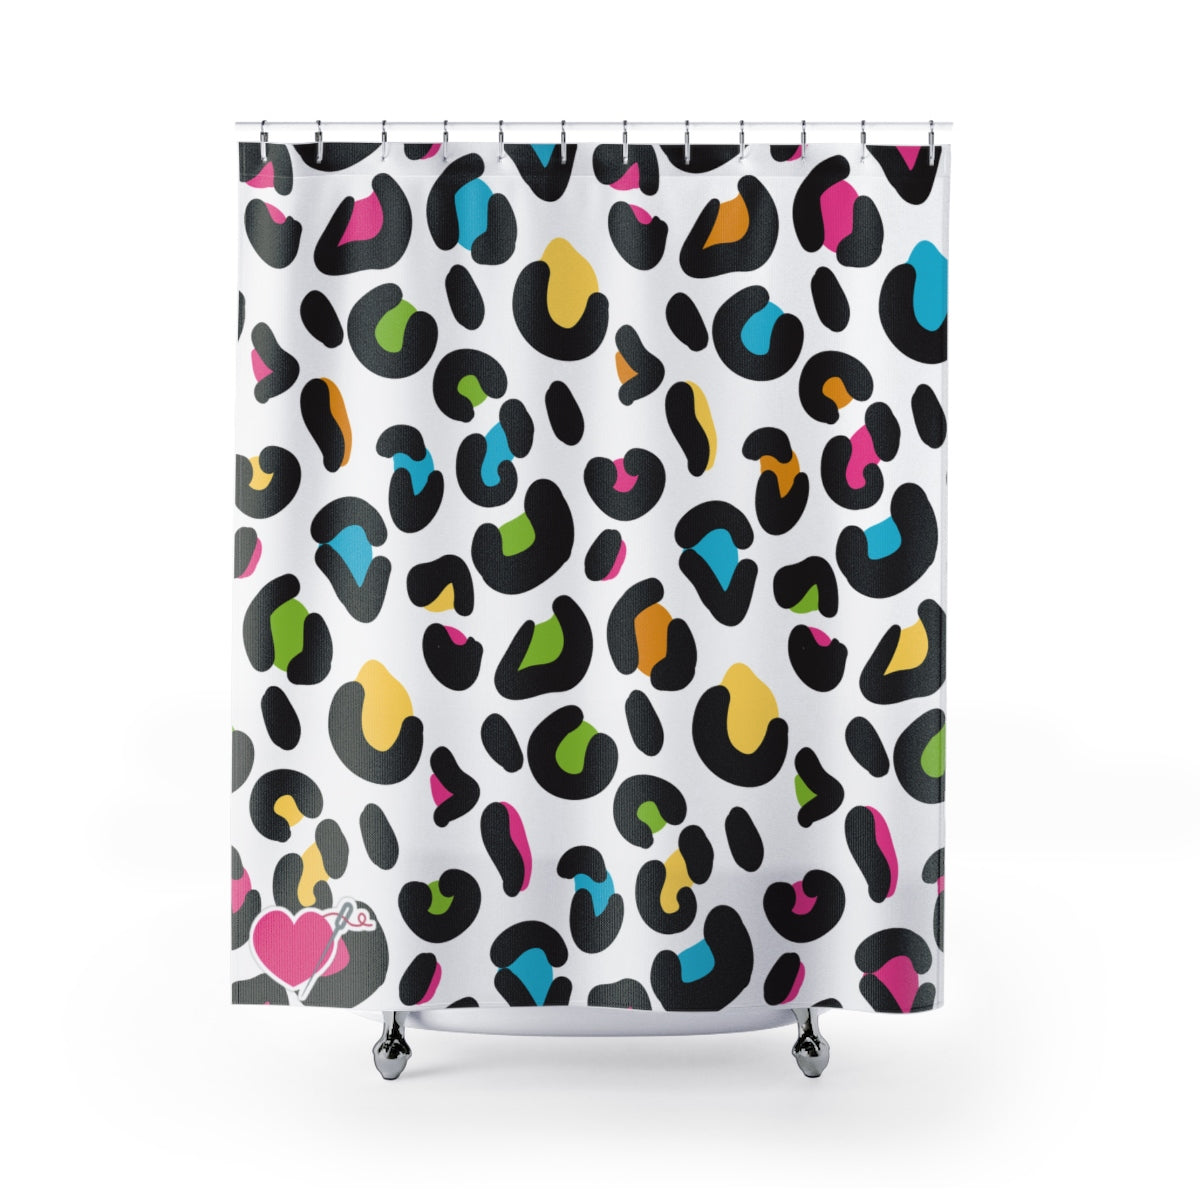 THE CABOODLE SHOWER CURTAIN 71"X74"